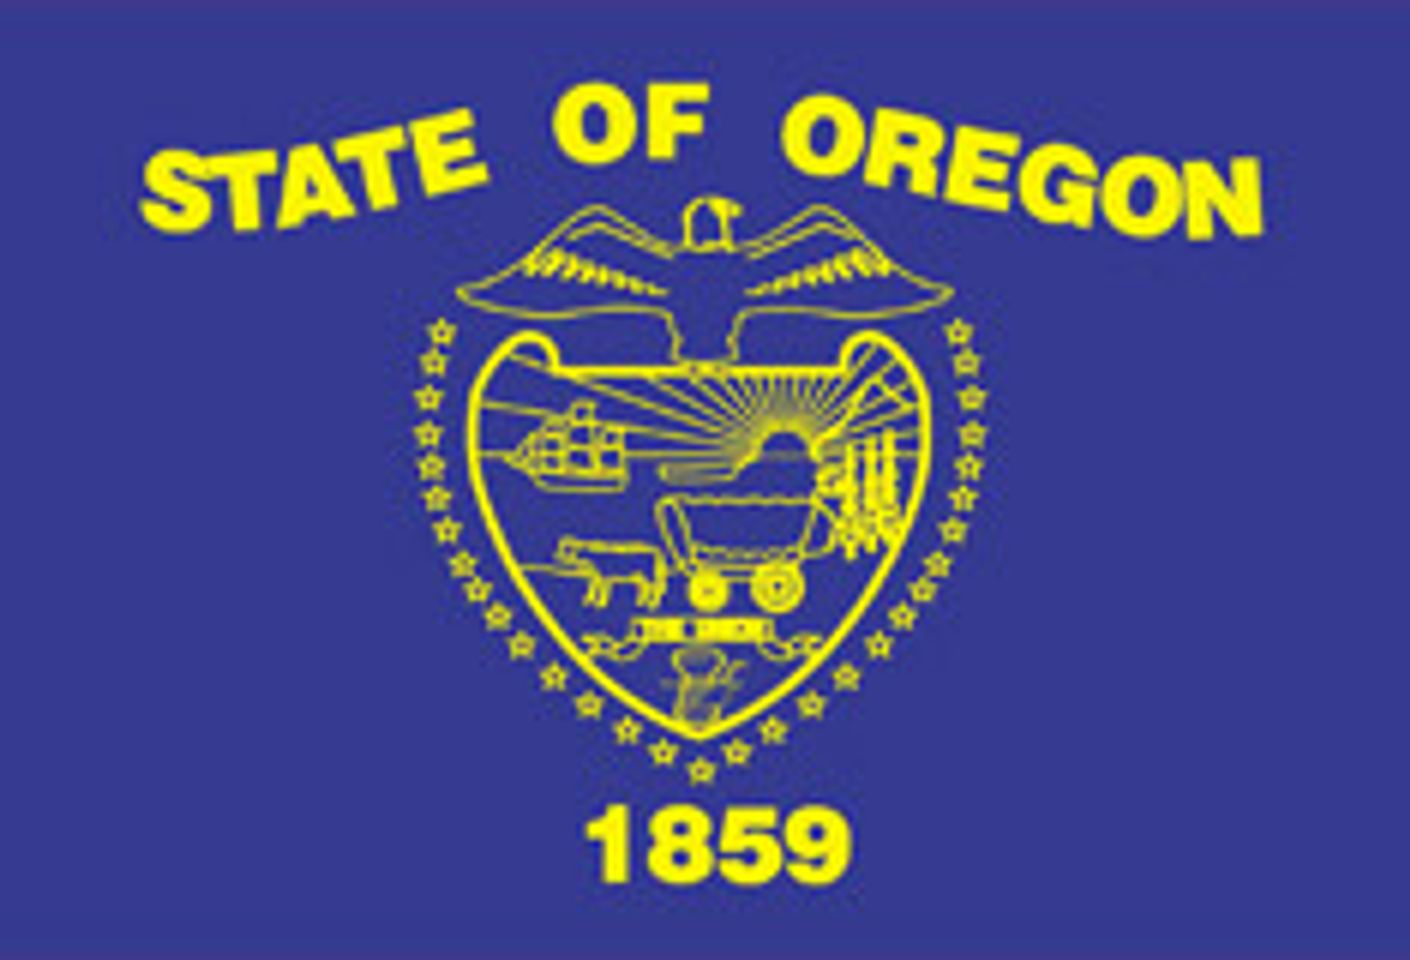 Speech Rights Protected in Oregon: State Supreme Court